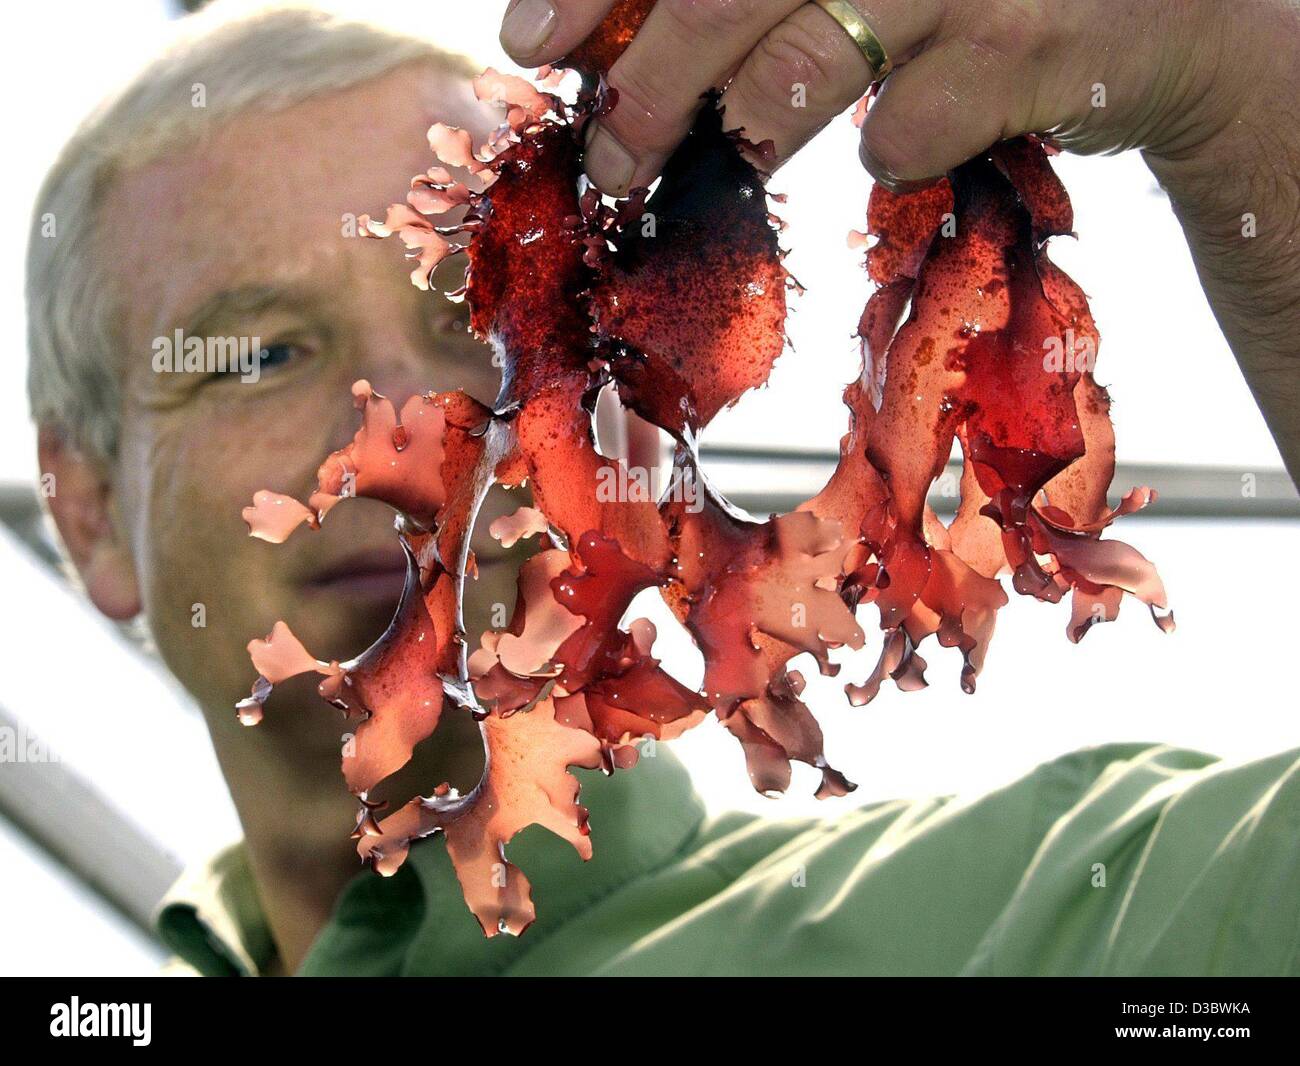 (dpa) - Marine biologist Klaus Luening looks at a dulse, an edible red seaweed, at the seaweed farm in List on the North Sea island Sylt, Germany, 29 July 2003. It is Germany's only 'breeding station' for algaes and seaweed and the algae production and marketing are tested in a project. Dulse are ap Stock Photo